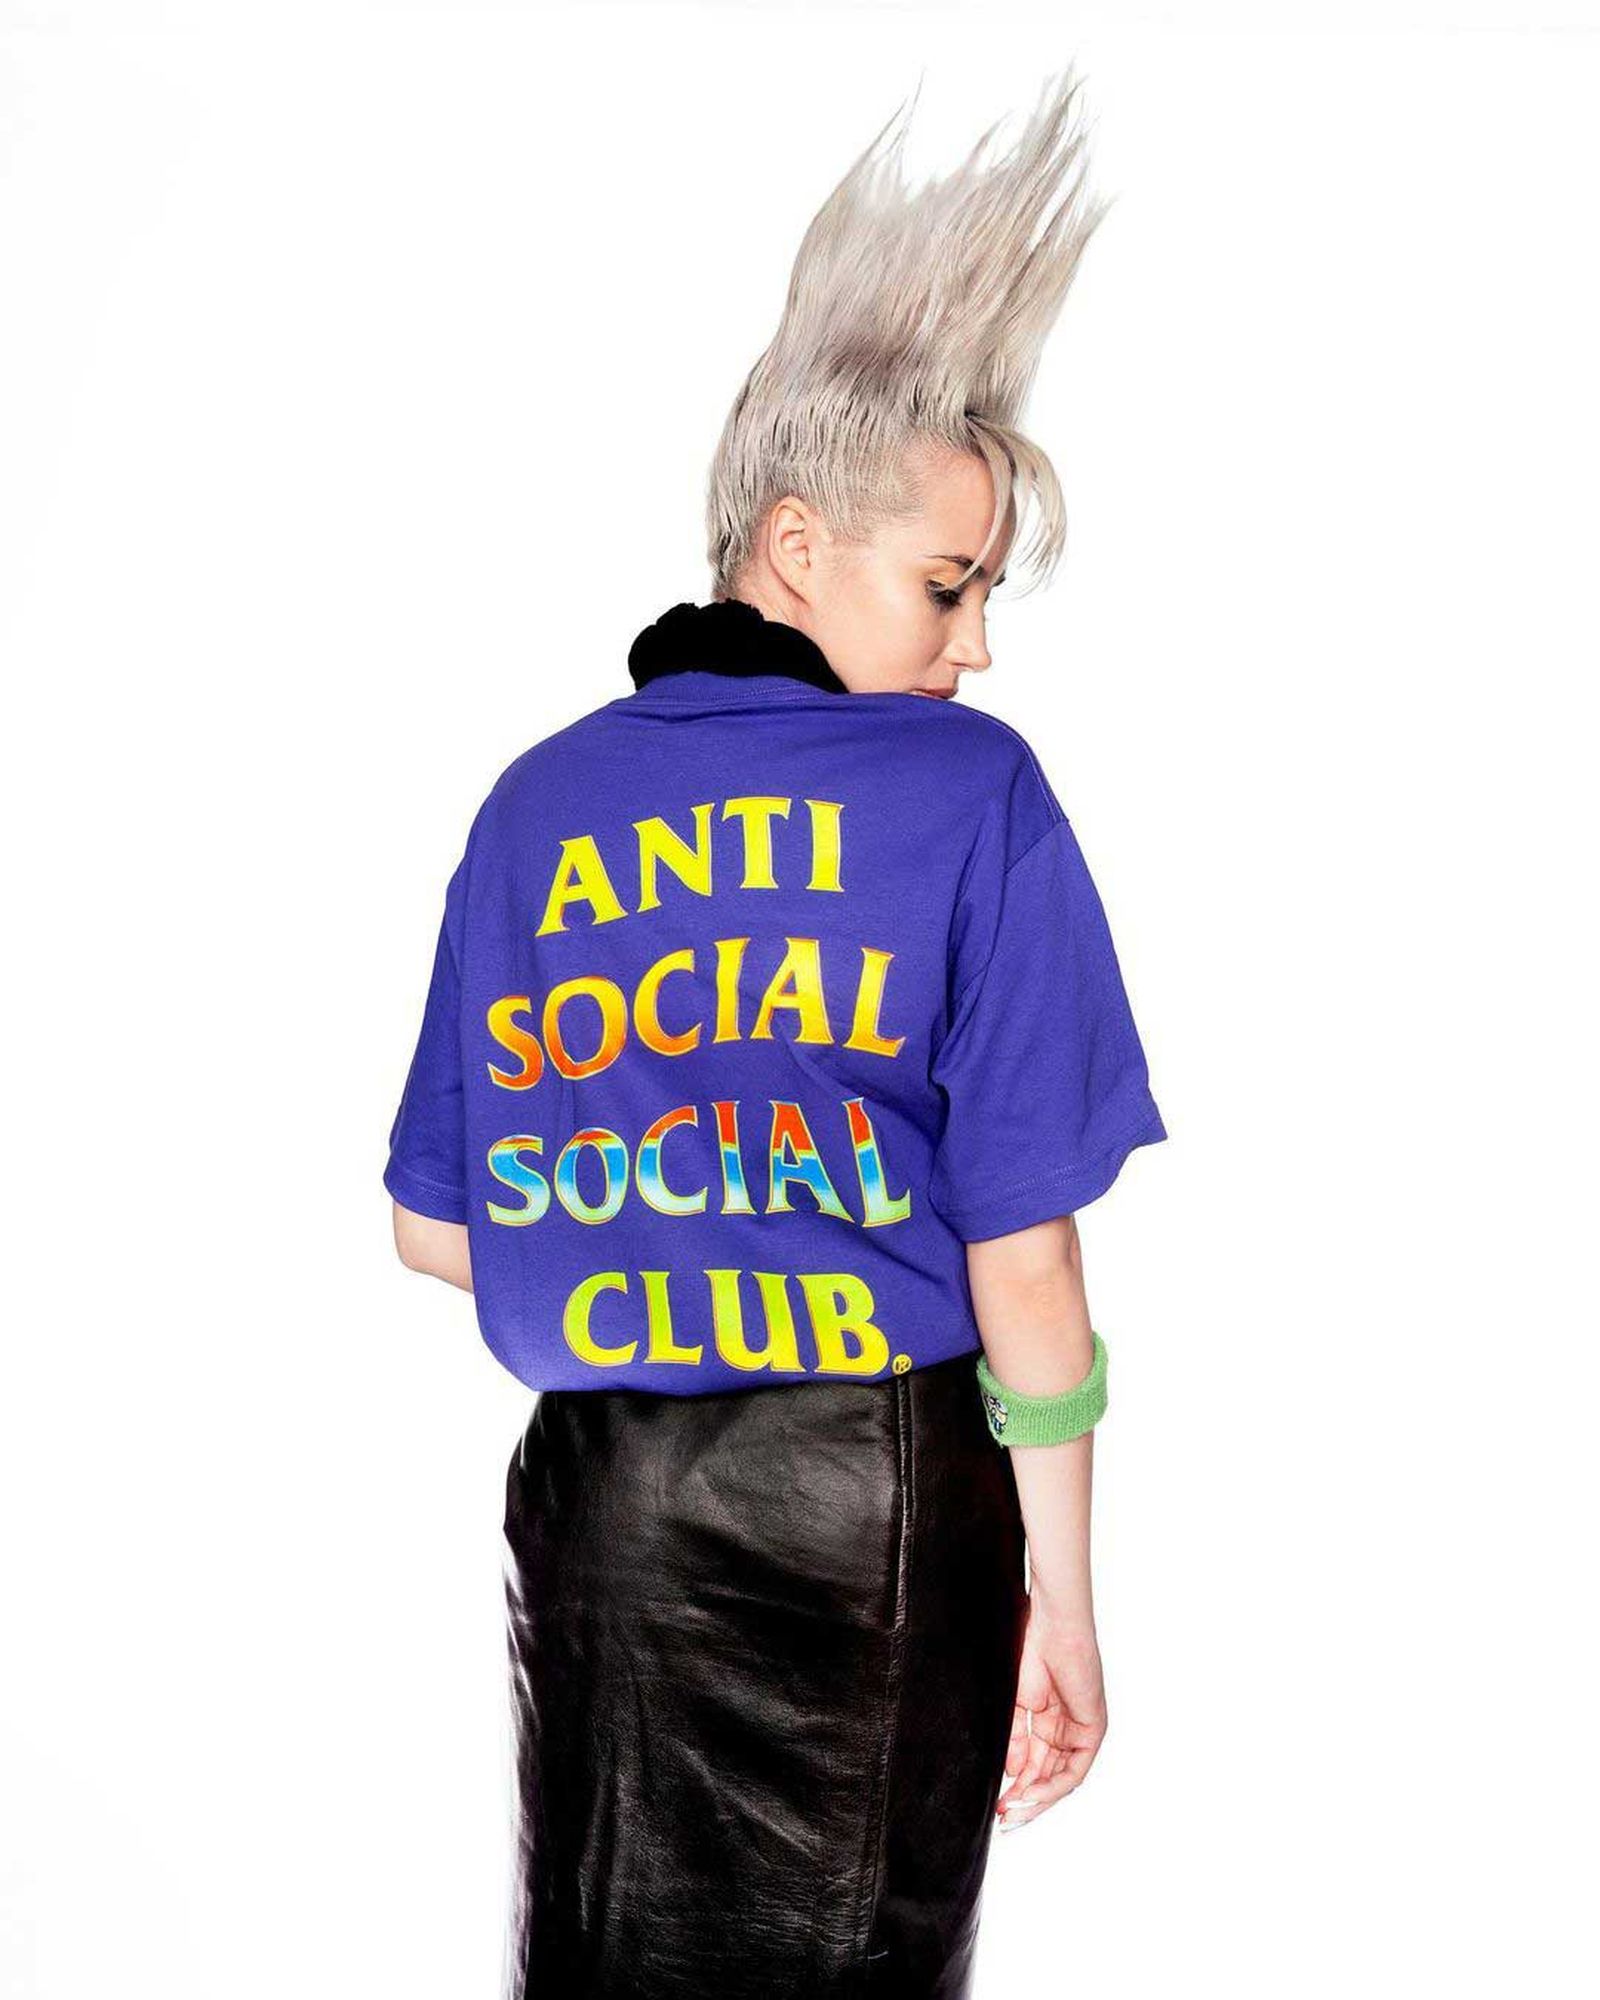 Uafhængig Mere end noget andet lyse Urban Outfitters Is Selling Anti Social Social Club: Why?